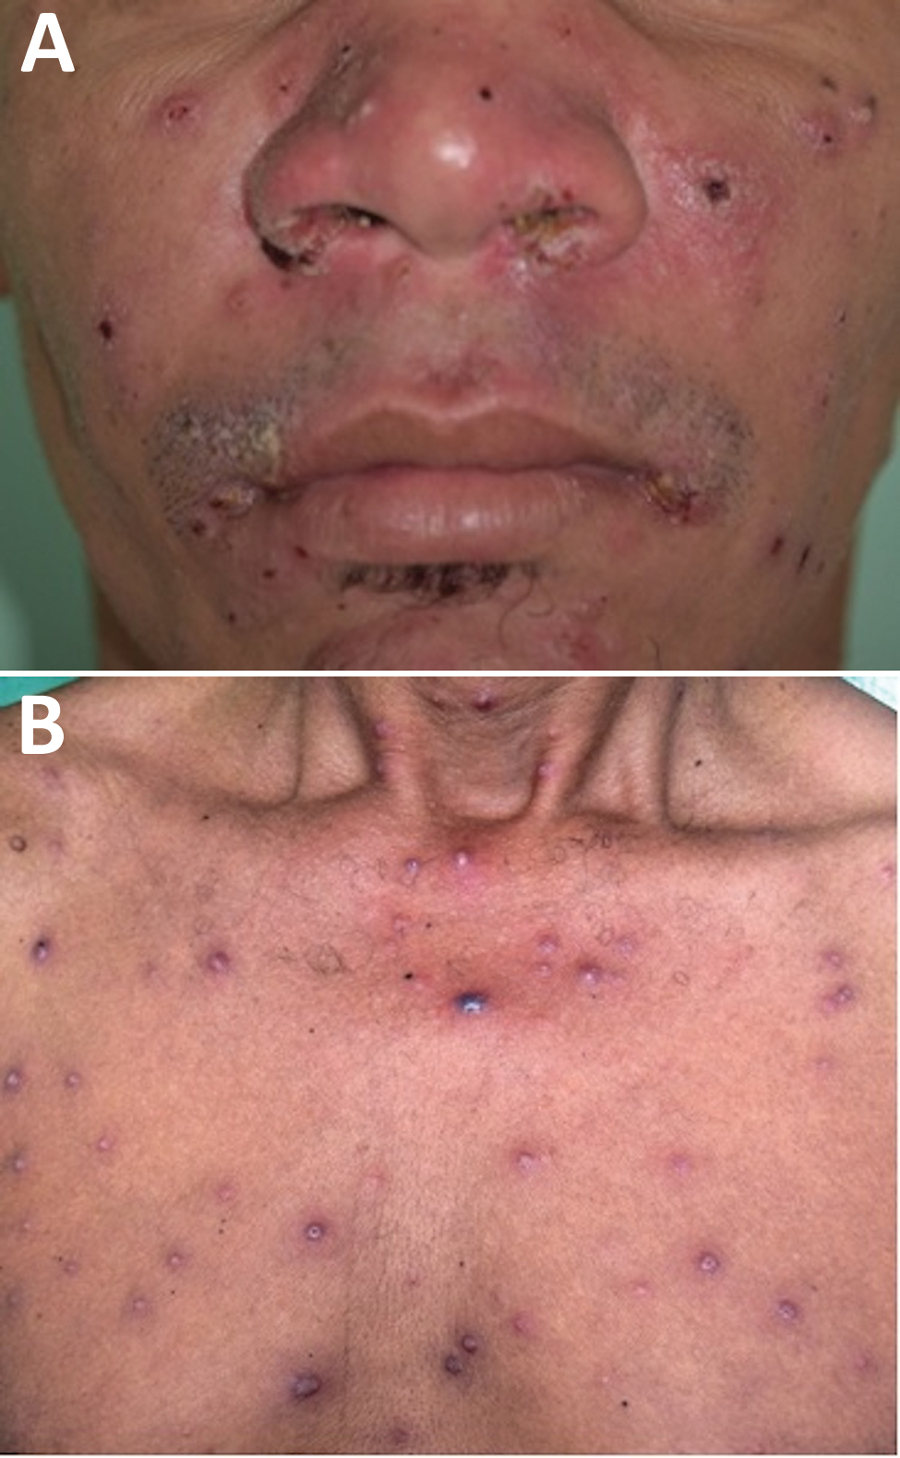 Clinical manifestation of disseminated leishmaniasis in male patient with multiple acneiform lesions, inflammatory and crusted papules in the face (A) and trunk (B), Brazil.